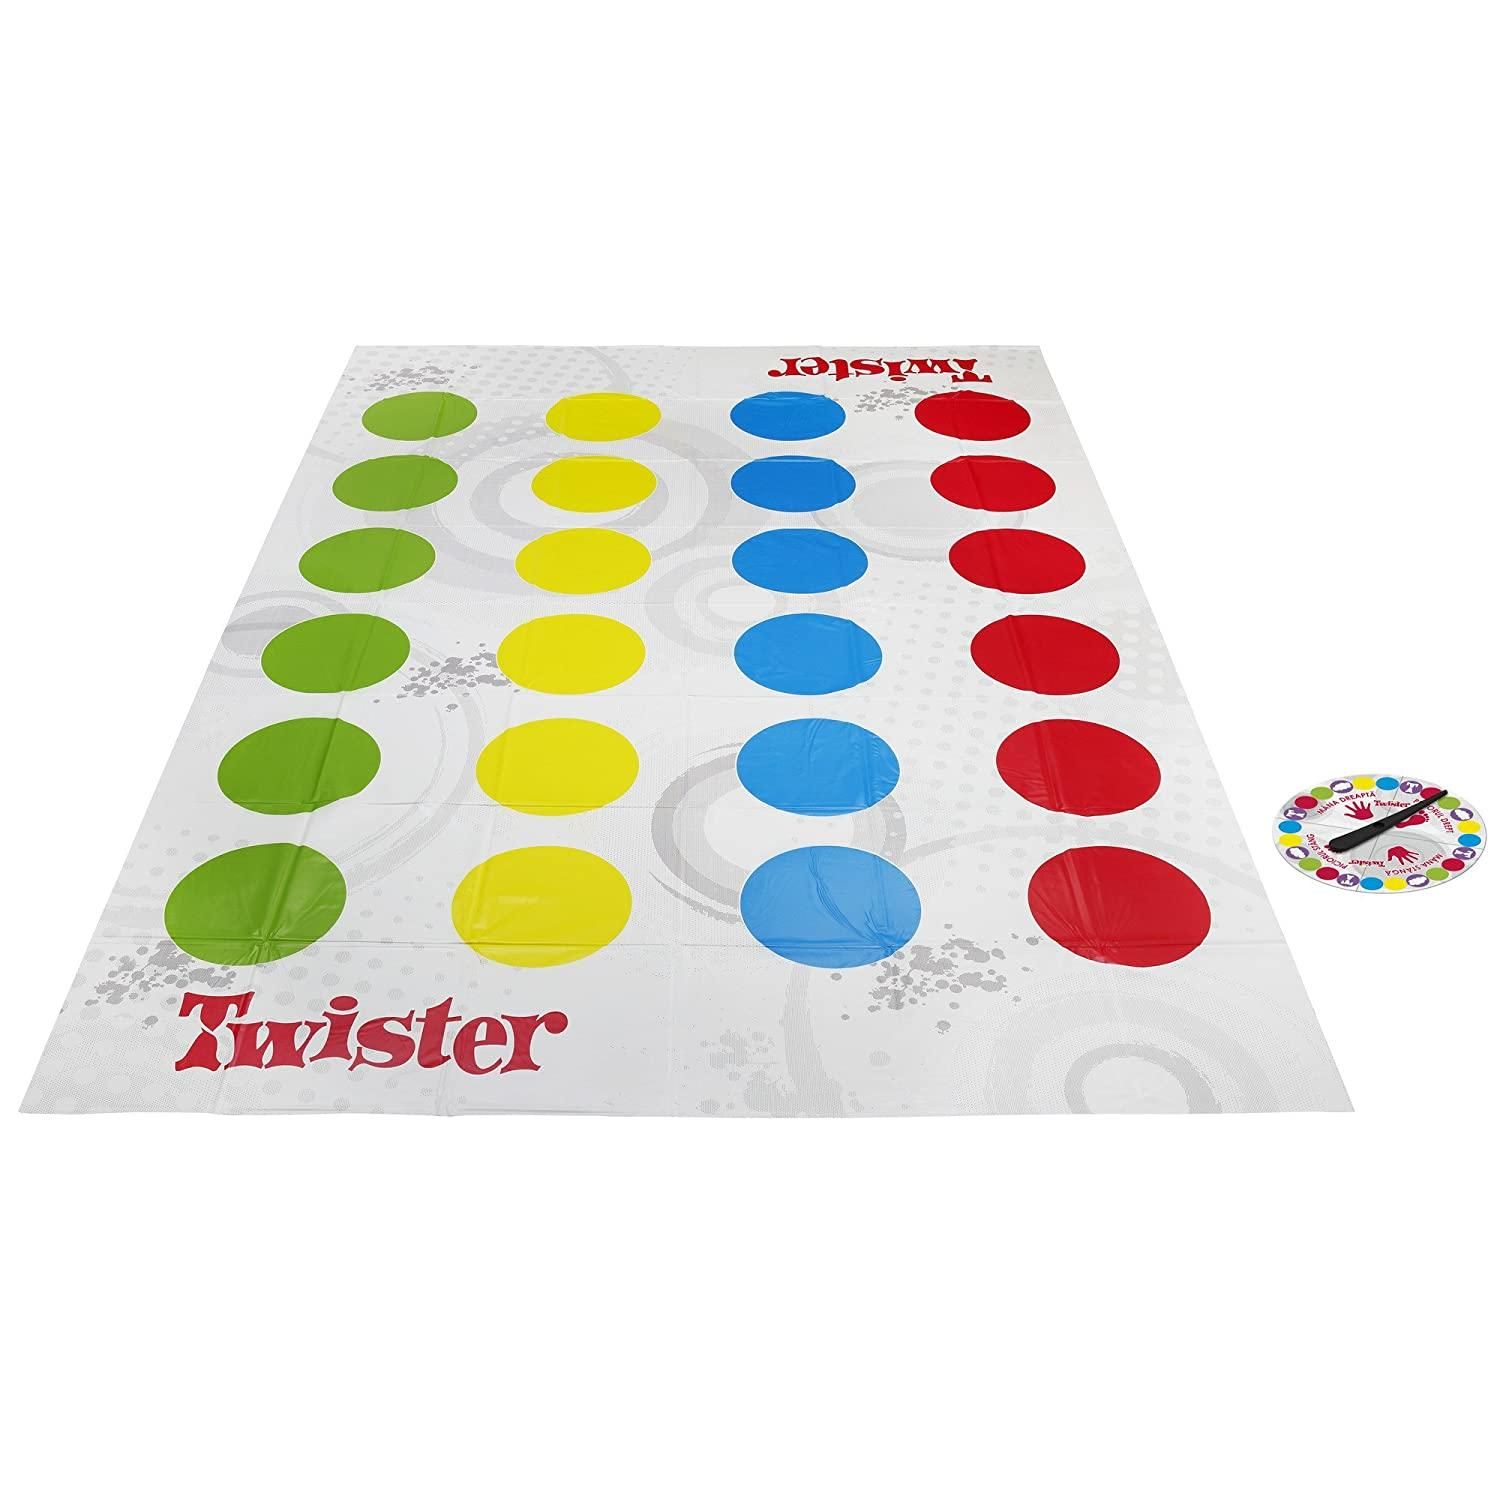 🍍Complete Twister Game for Family Fun!